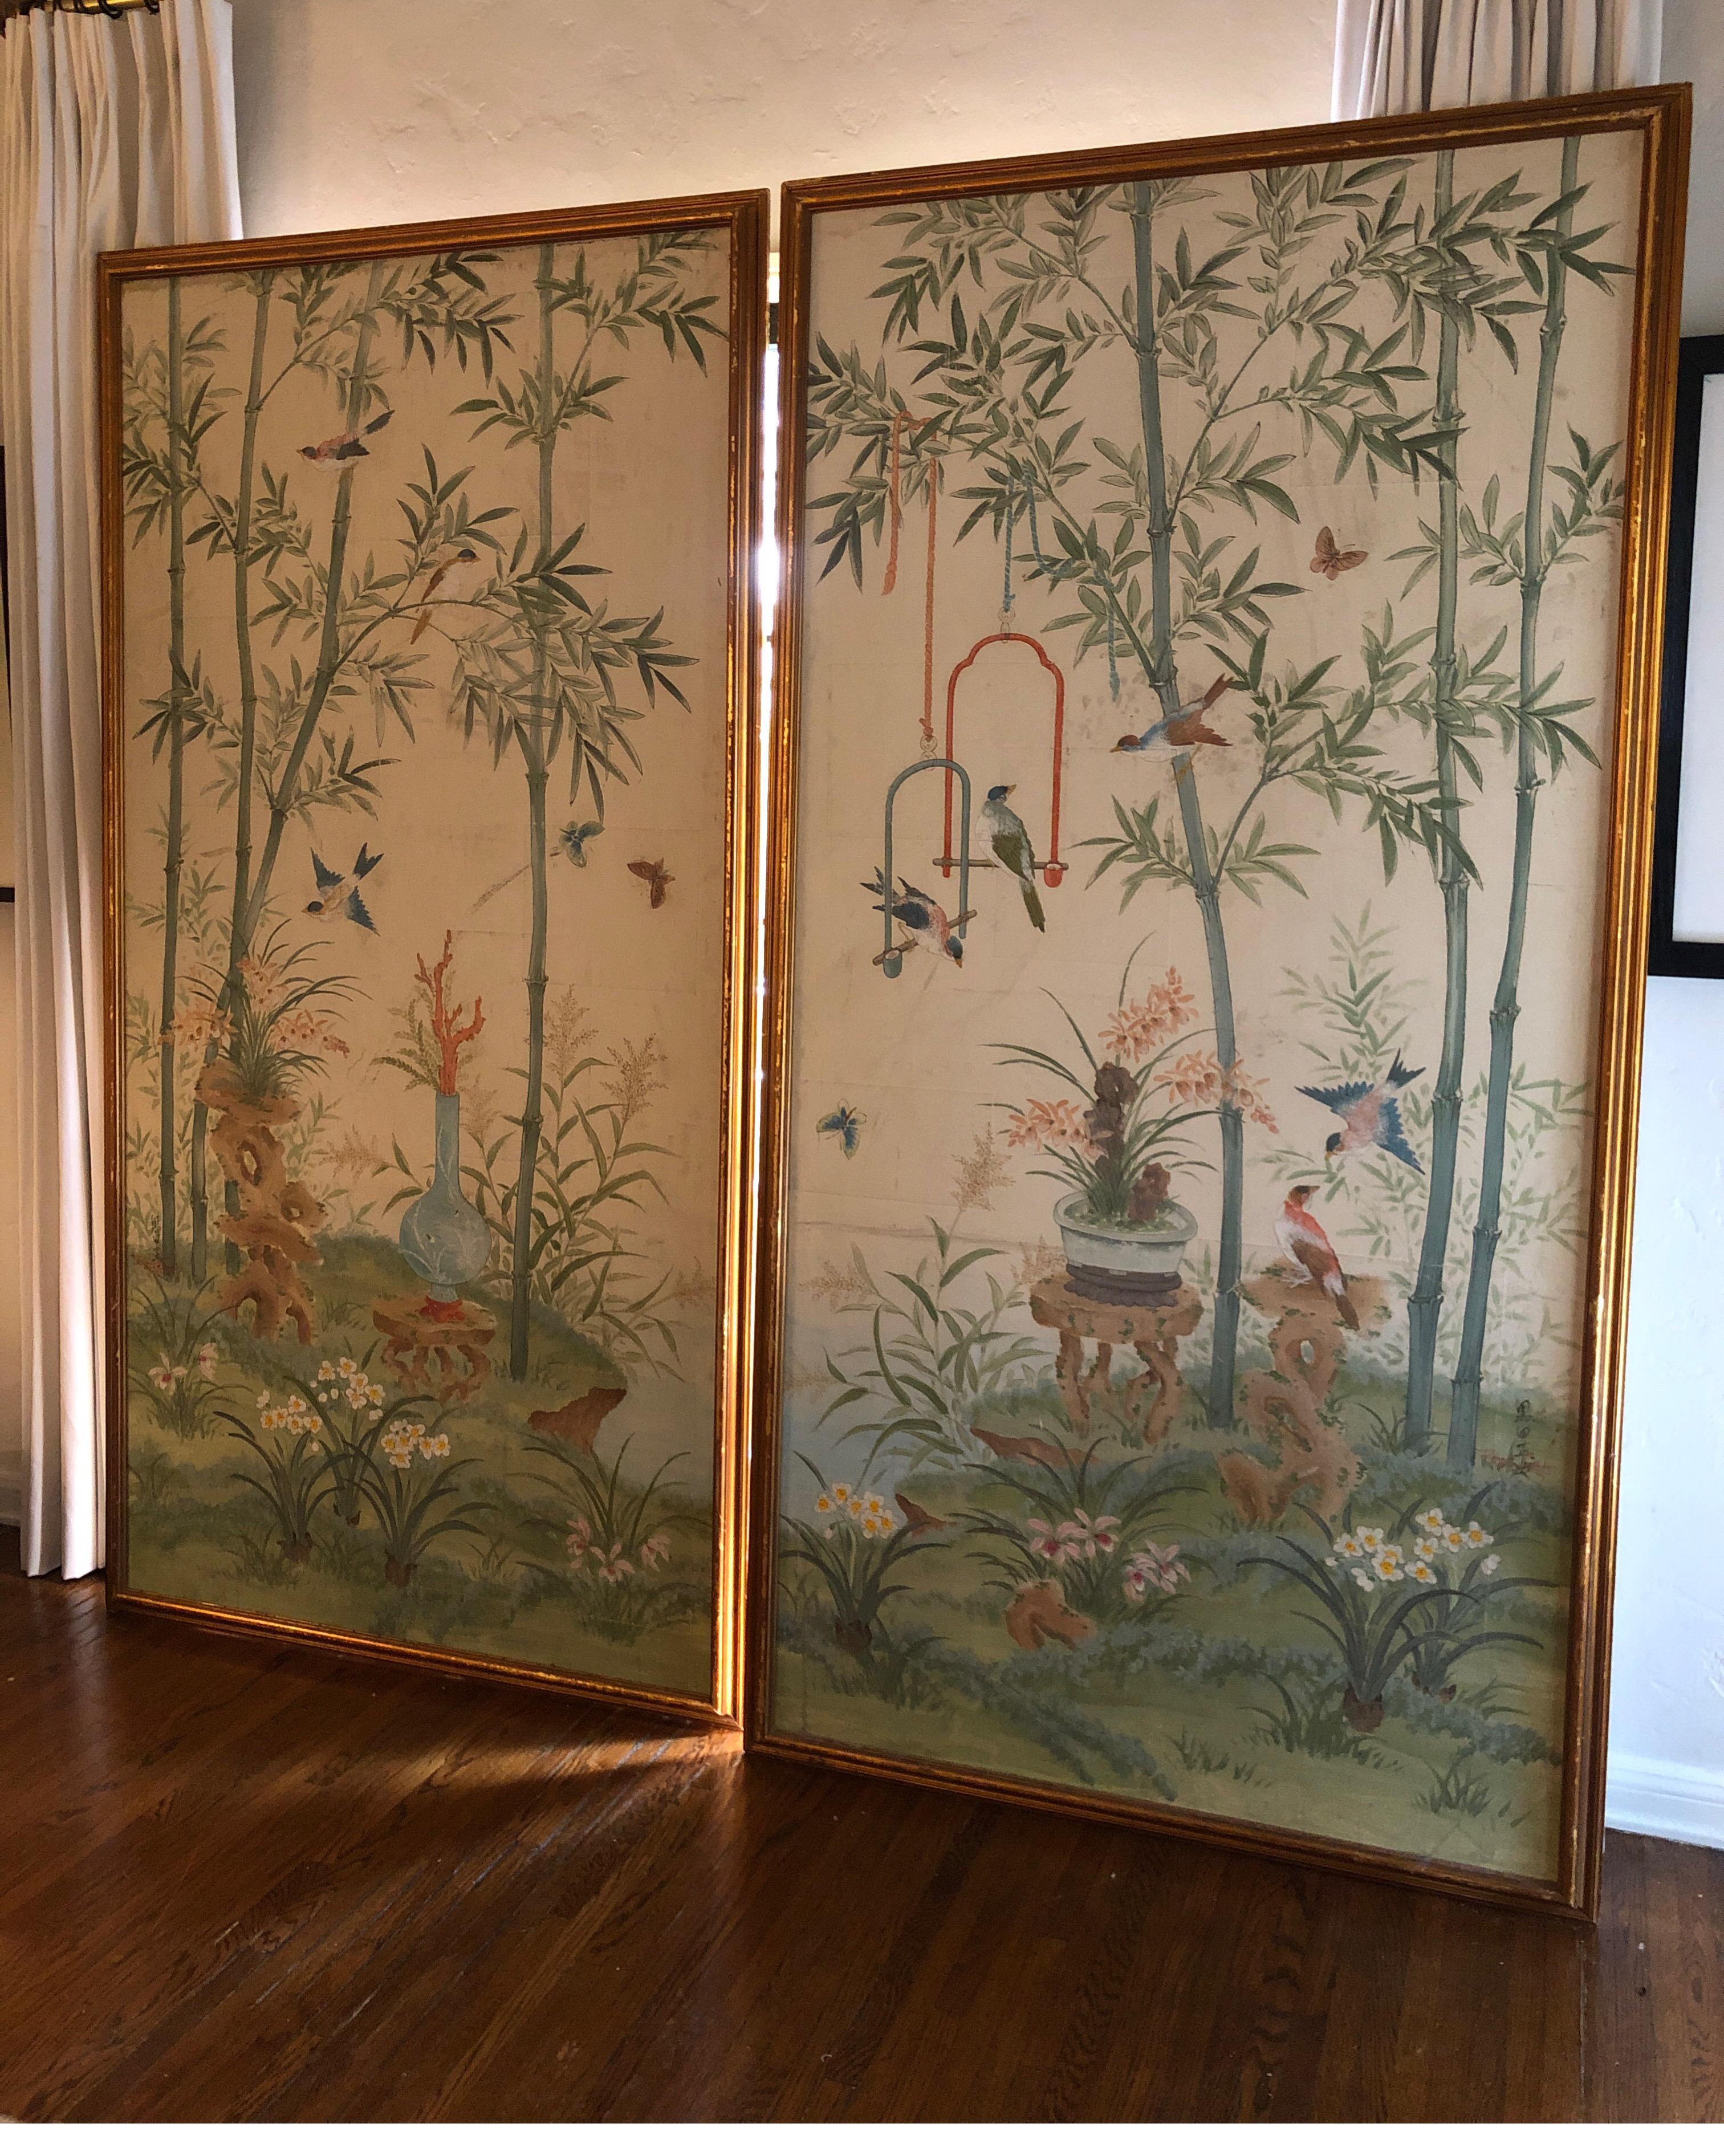 Gorgeous pair large scale hand painted chinoiserie panels by Robert Crowder (1911-2010).
Each panel has detailed birds, flowers, leaves and butterflies. 

Each panel has a gilt gold frame.